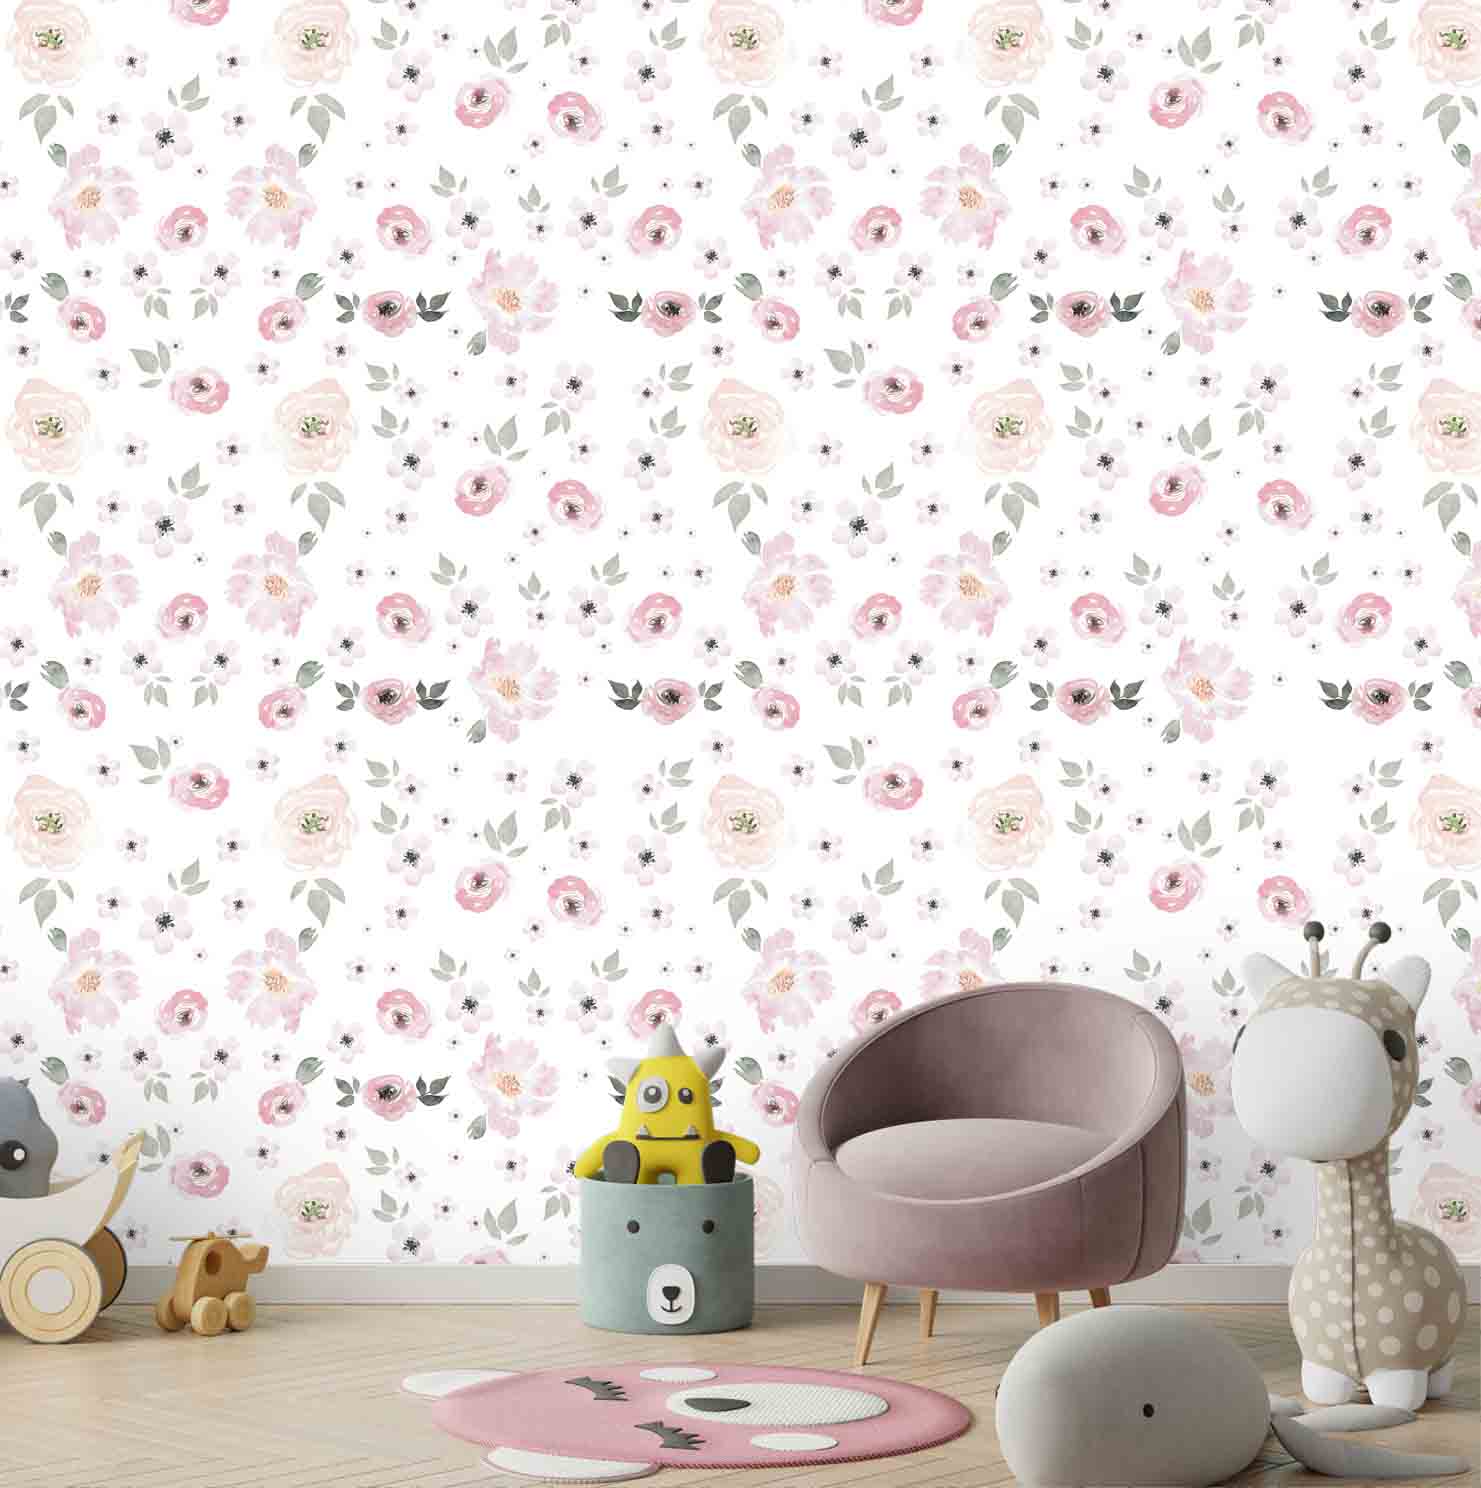 Water Painted Floral Design For Kids Room